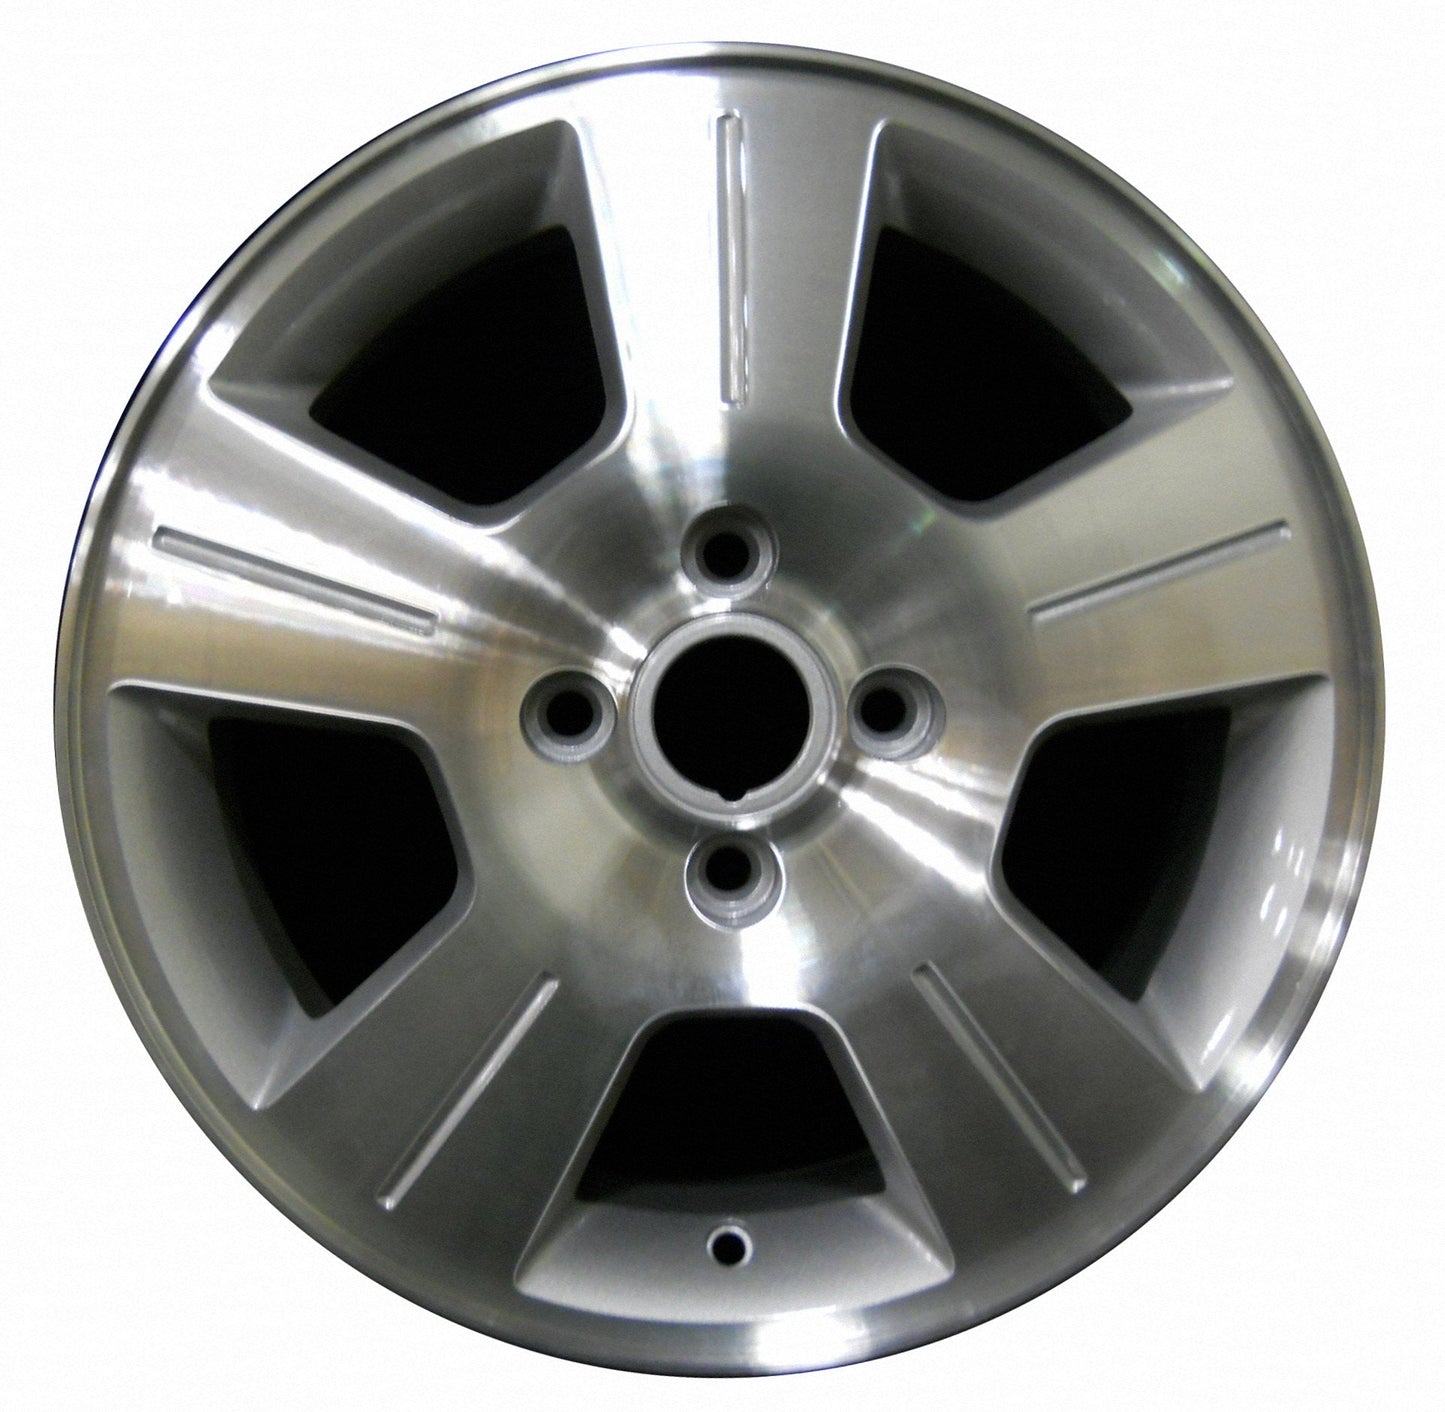 Ford Focus  2003, 2004, 2005, 2006, 2007 Factory OEM Car Wheel Size 16x6 Alloy WAO.3530.PS02.MA